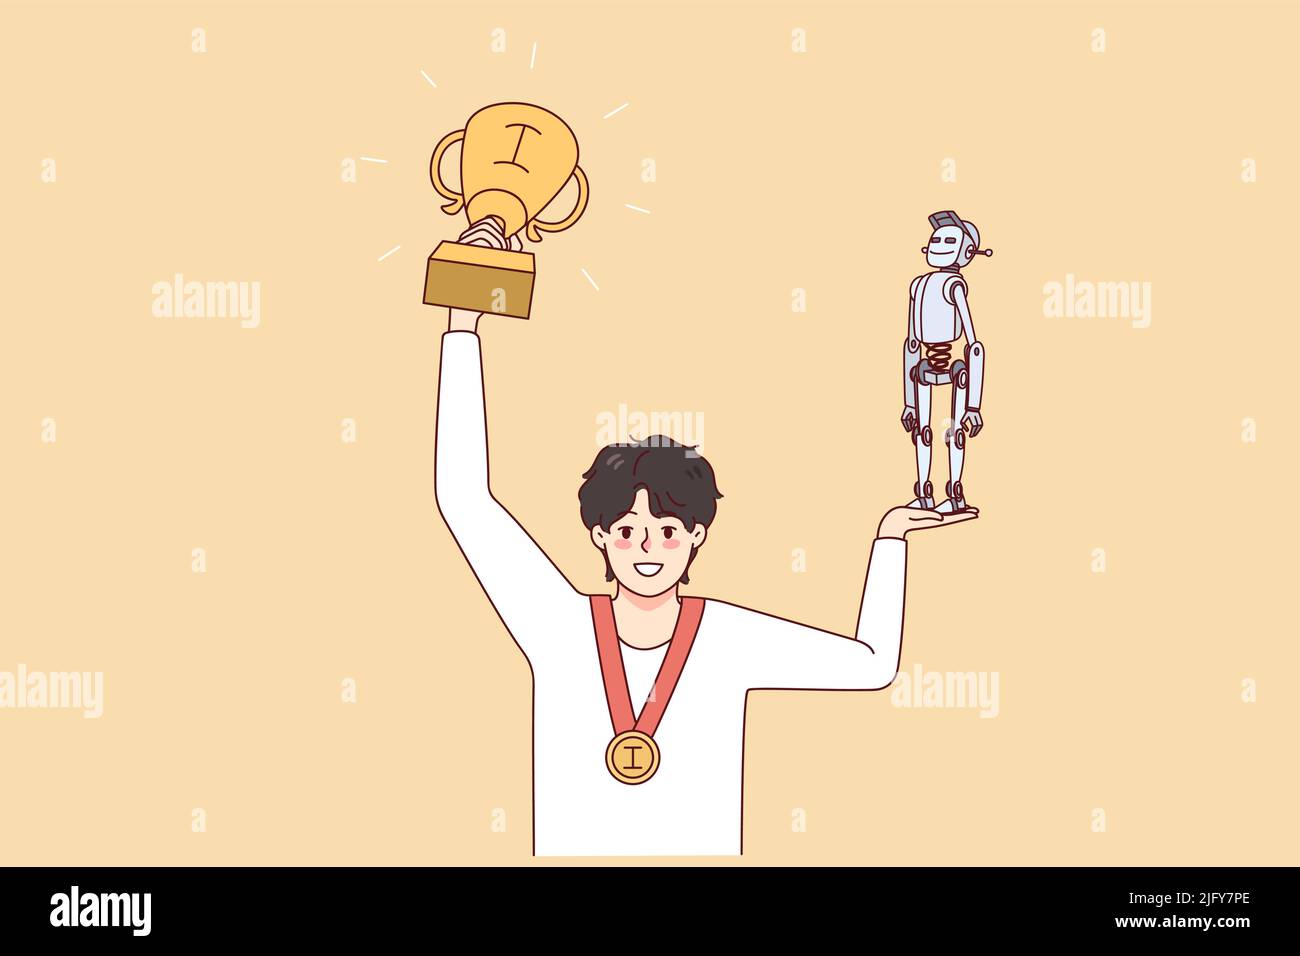 https://c8.alamy.com/comp/2JFY7PE/happy-boy-holding-robot-and-prize-excited-about-contest-victory-smiling-child-win-robotic-competition-engineering-student-with-award-flat-vector-illustration-2JFY7PE.jpg